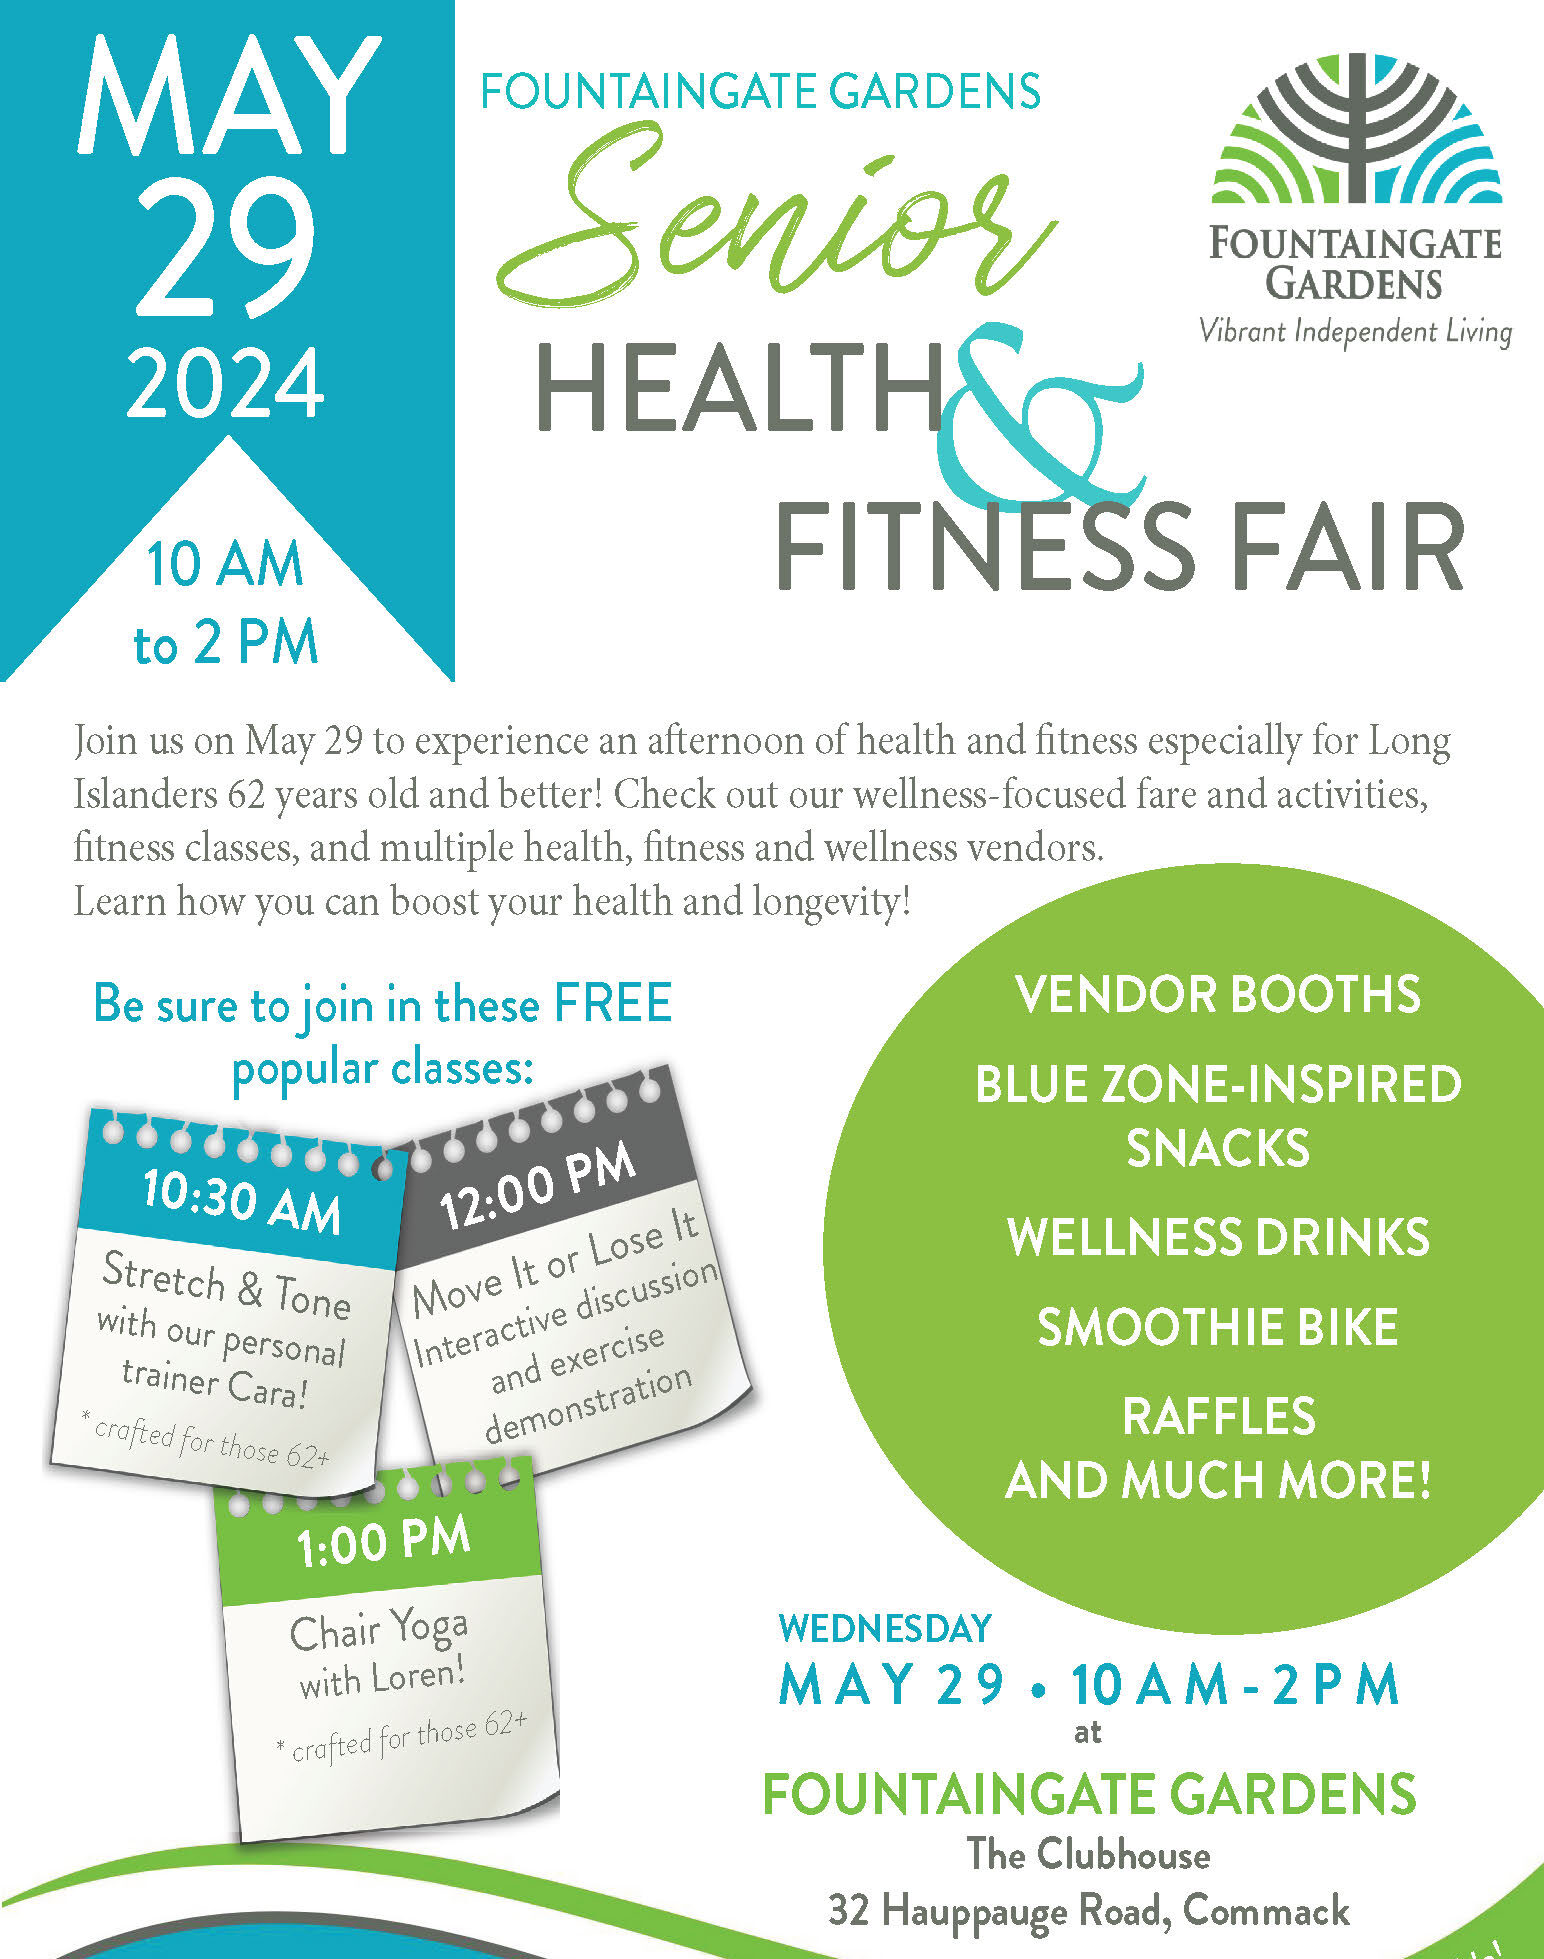 May 29, 2024 Senior Health and Fitness Fair at Fountaingate Gardens